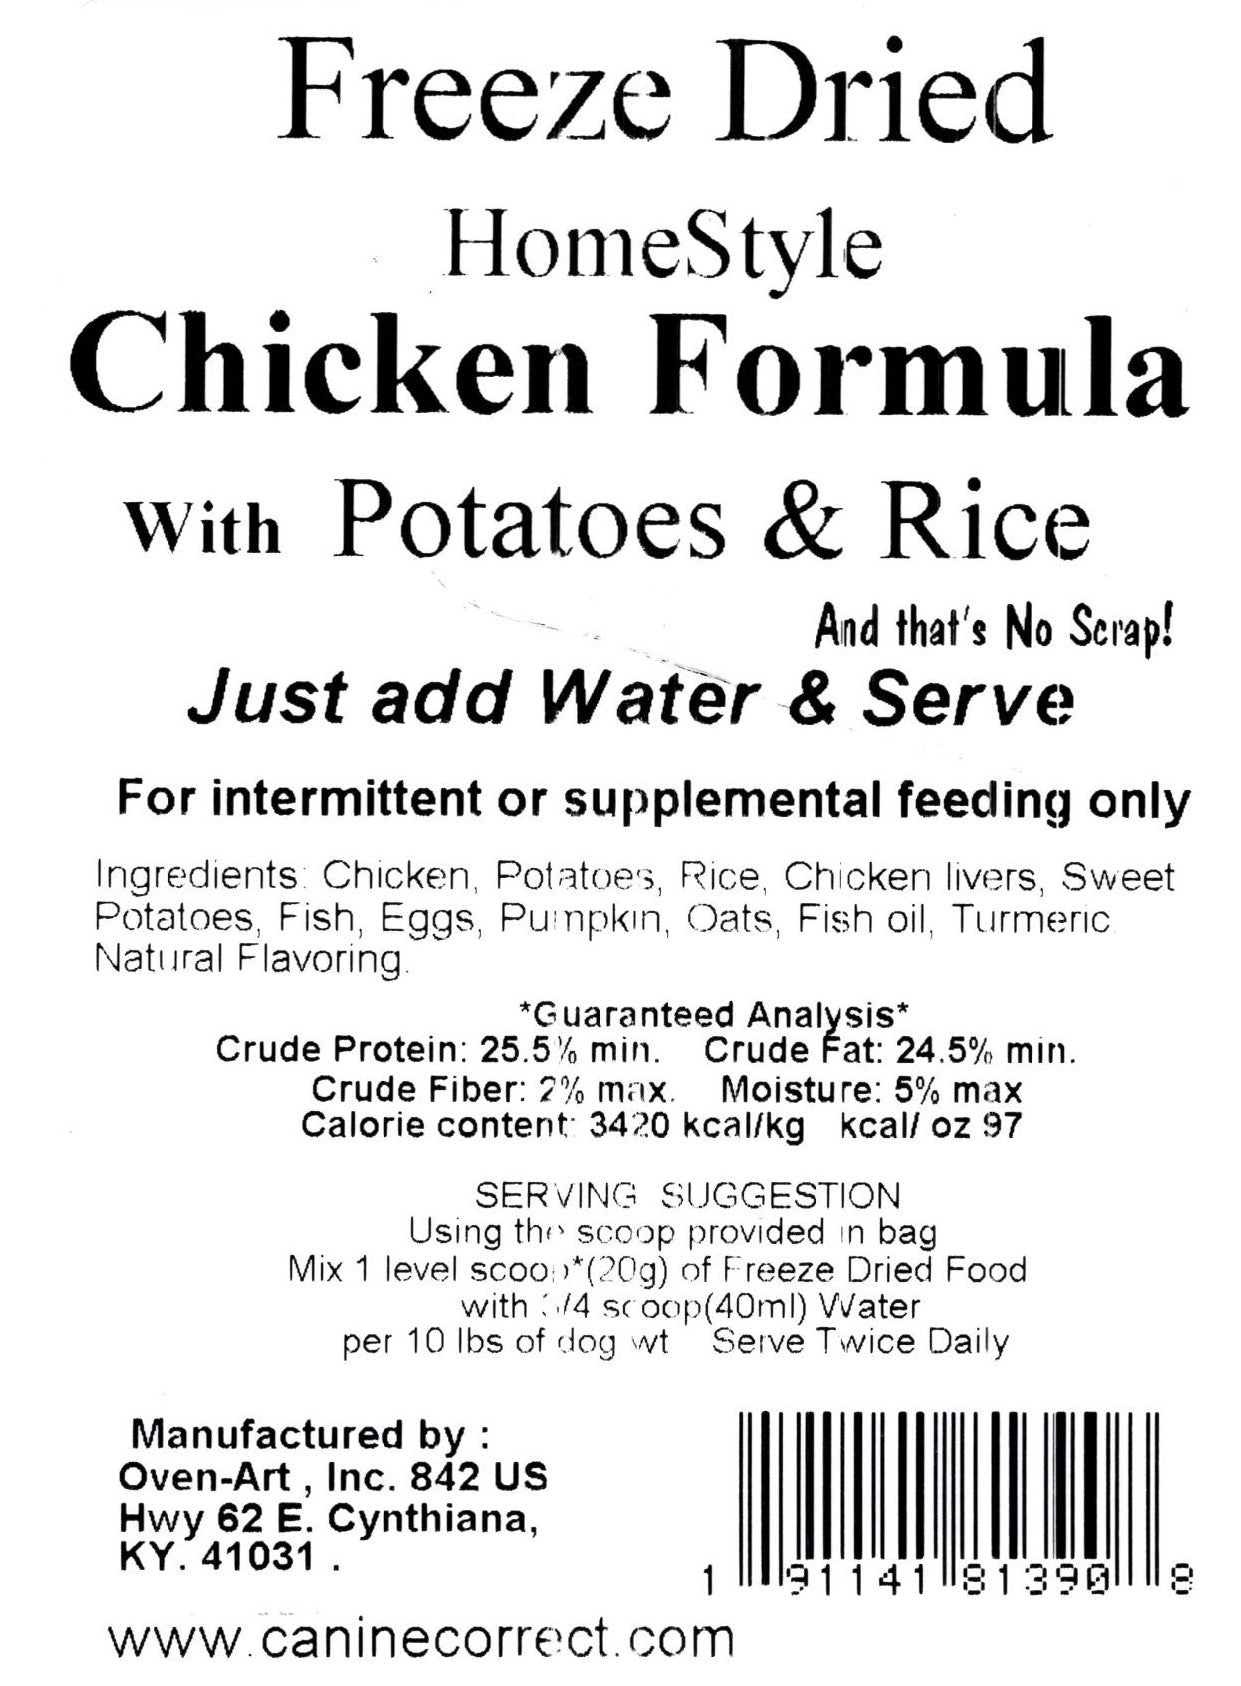 Canine Correct Home-Style Chicken Formula